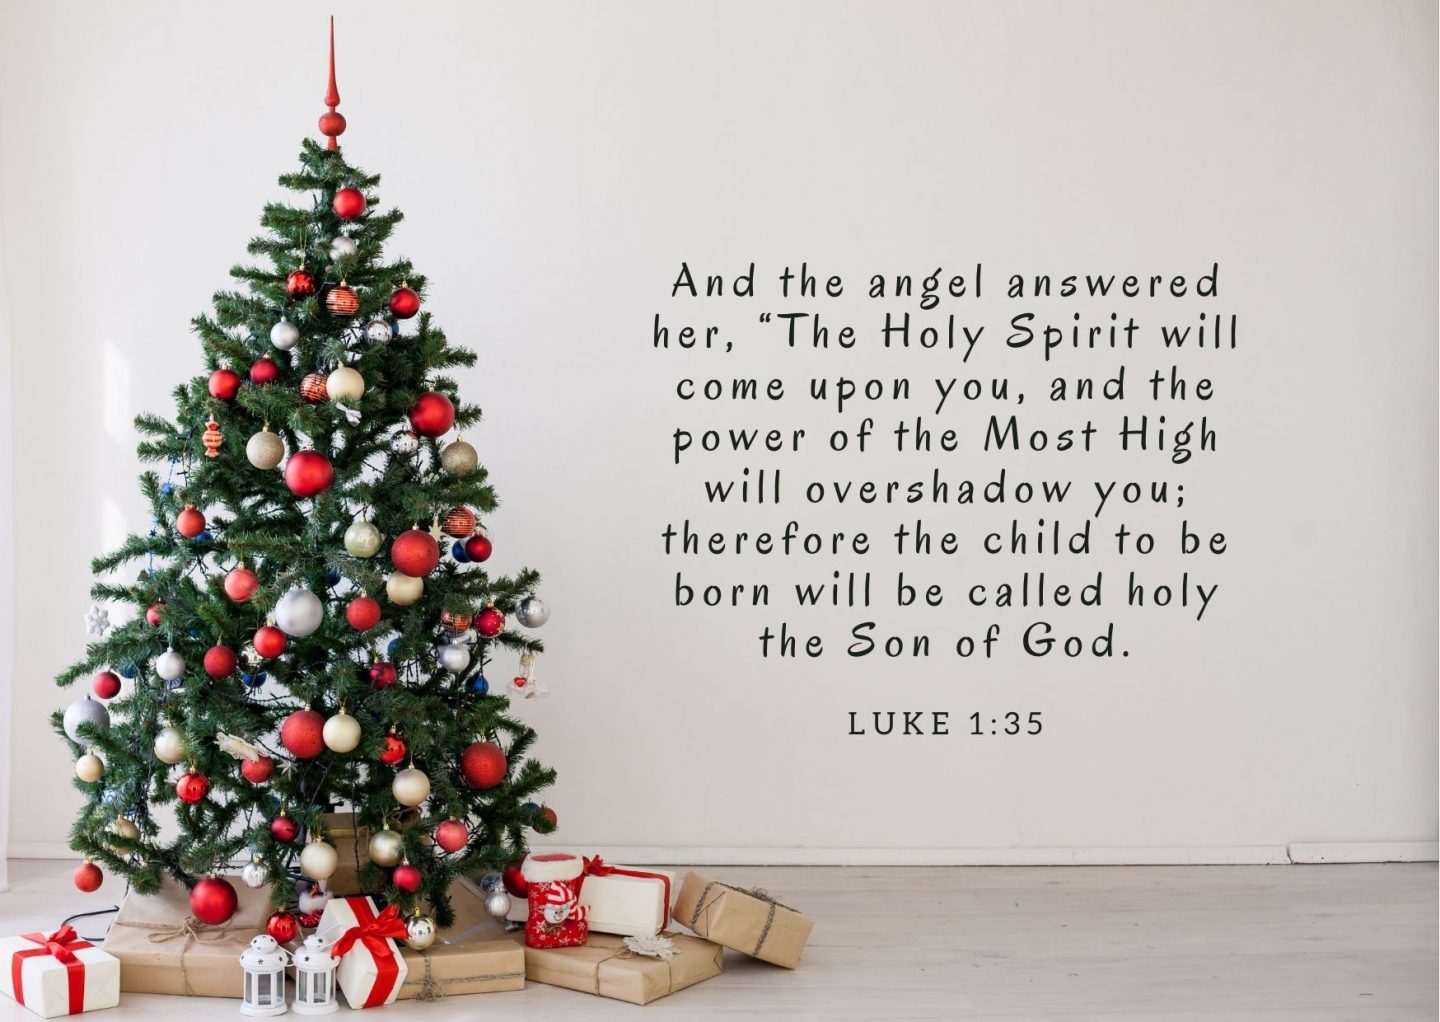 42 Bible Verses For Christmas Cards - The Graceful Chapter